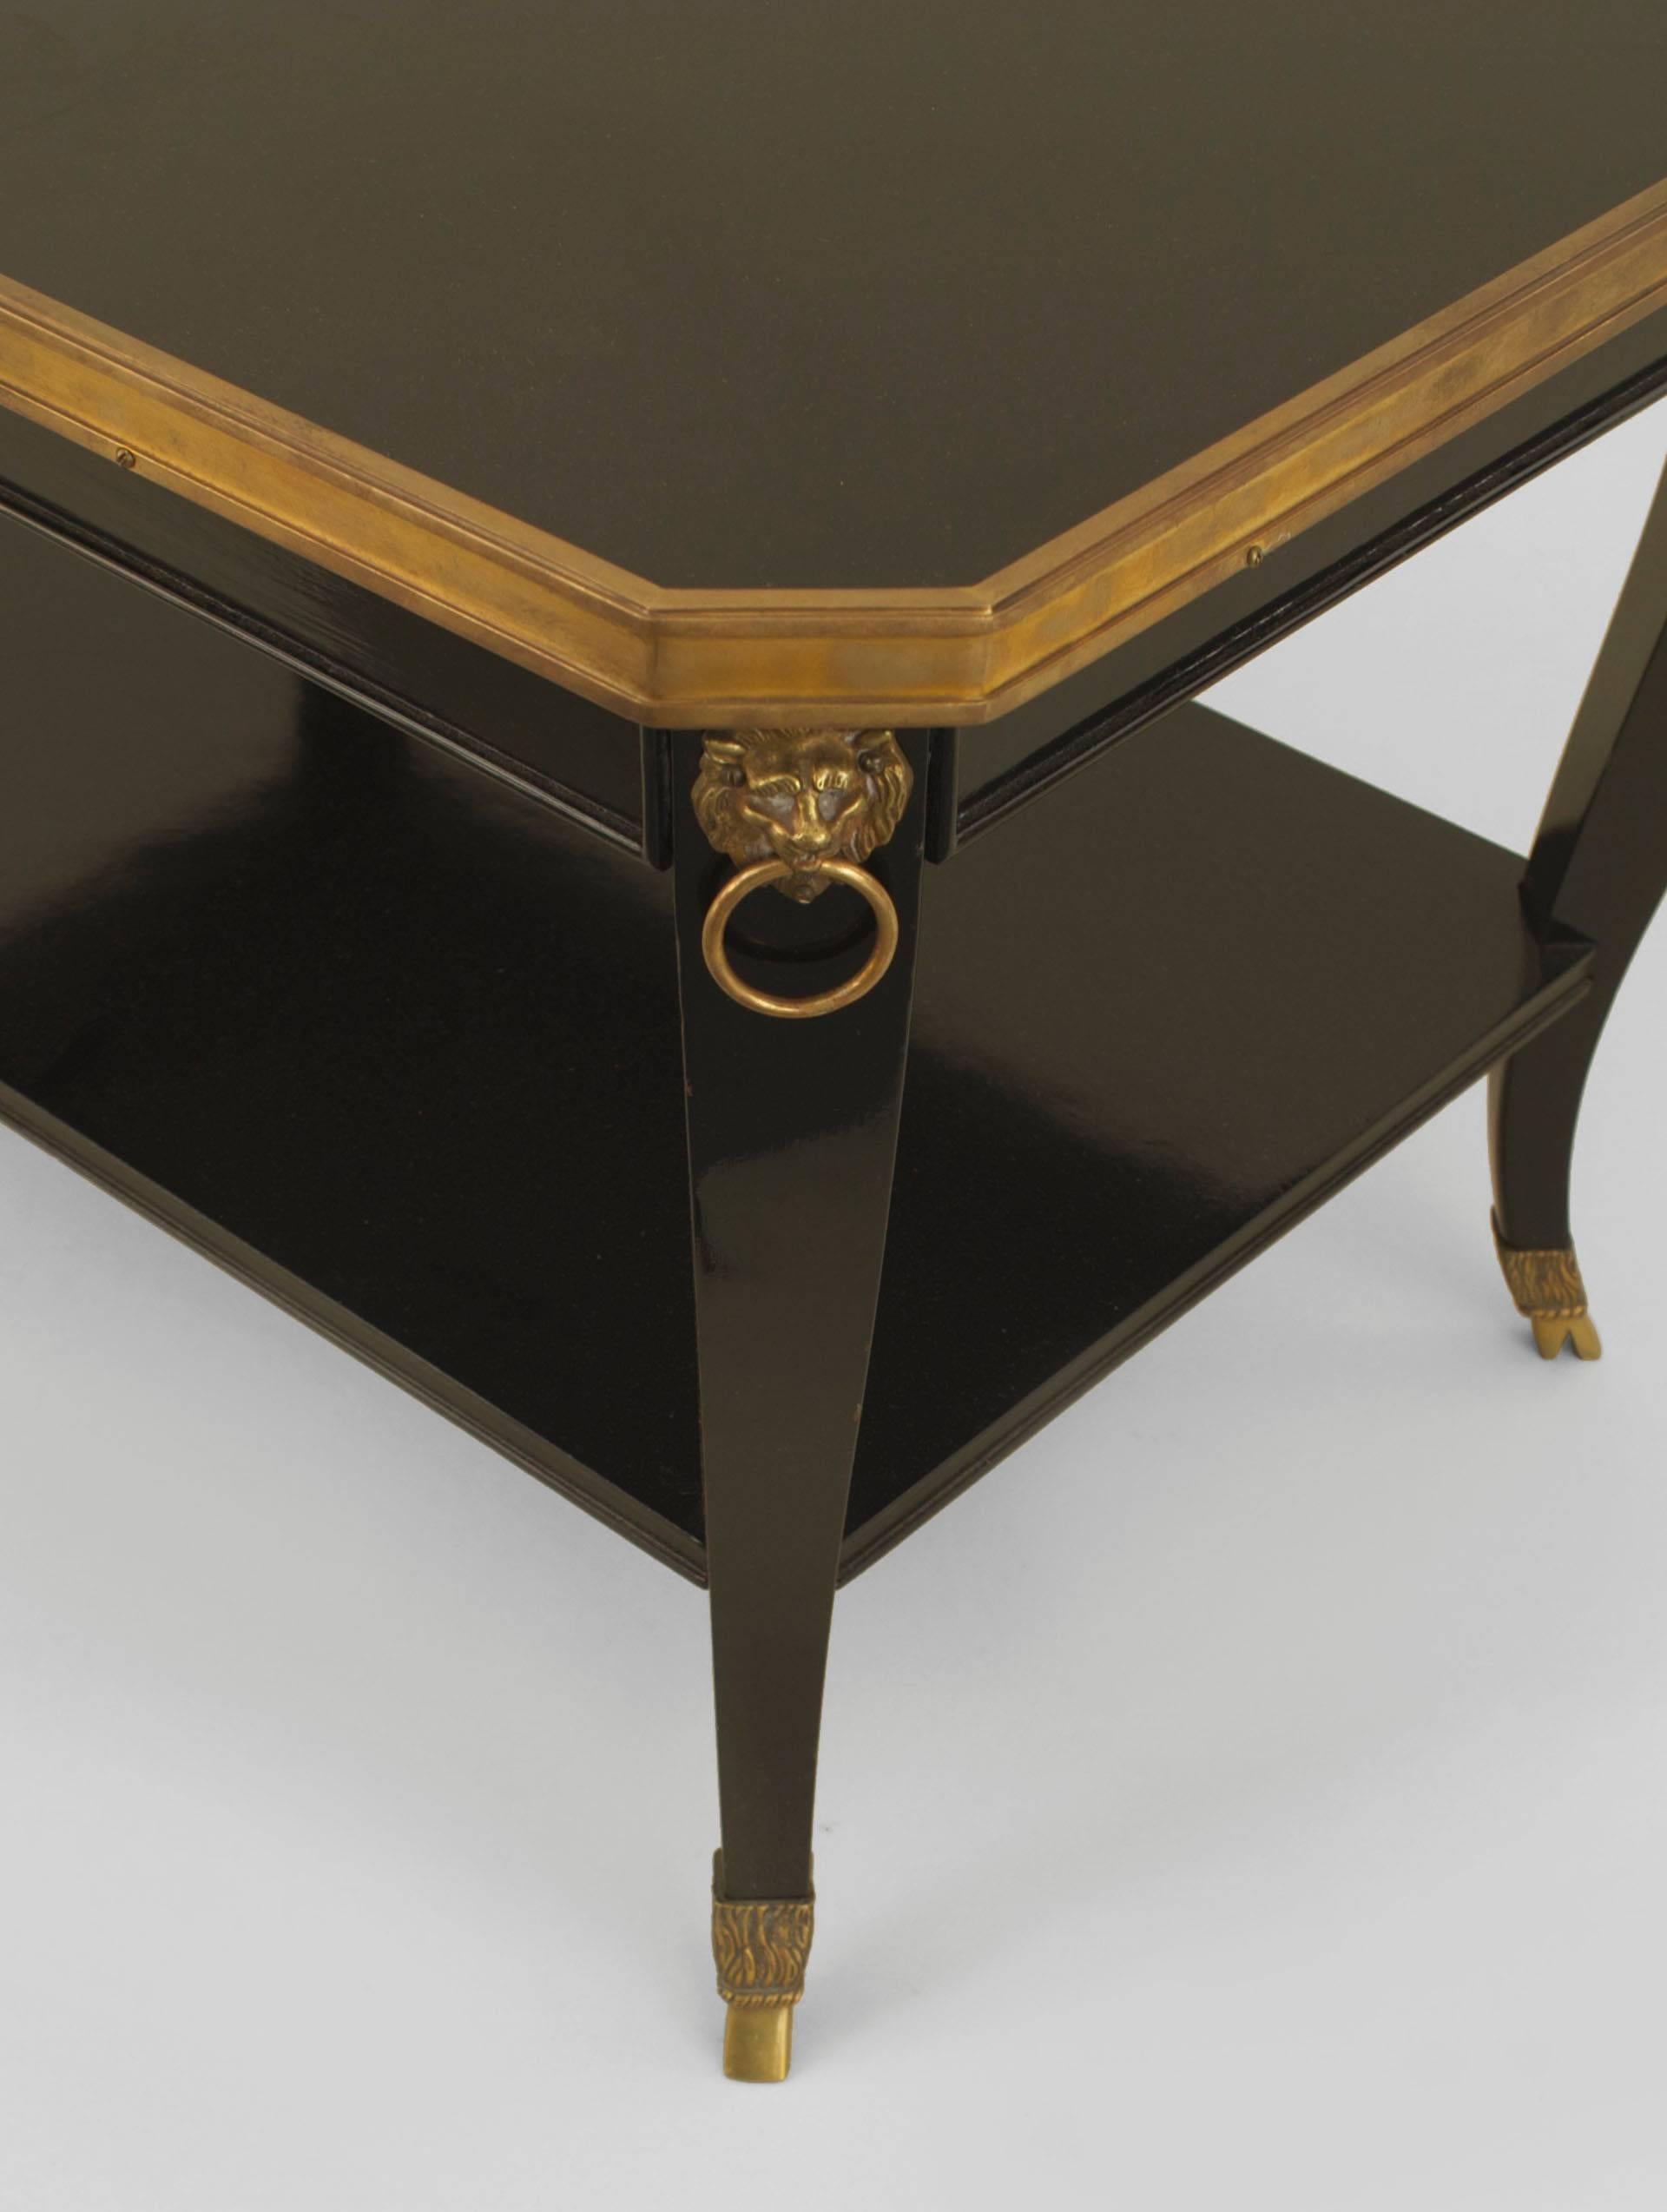 French 1940s (Regency style) ebonized rectangular top coffee table with a shelf and bronze top edge with lion head trim and hoof feet (stamped: JANSEN).